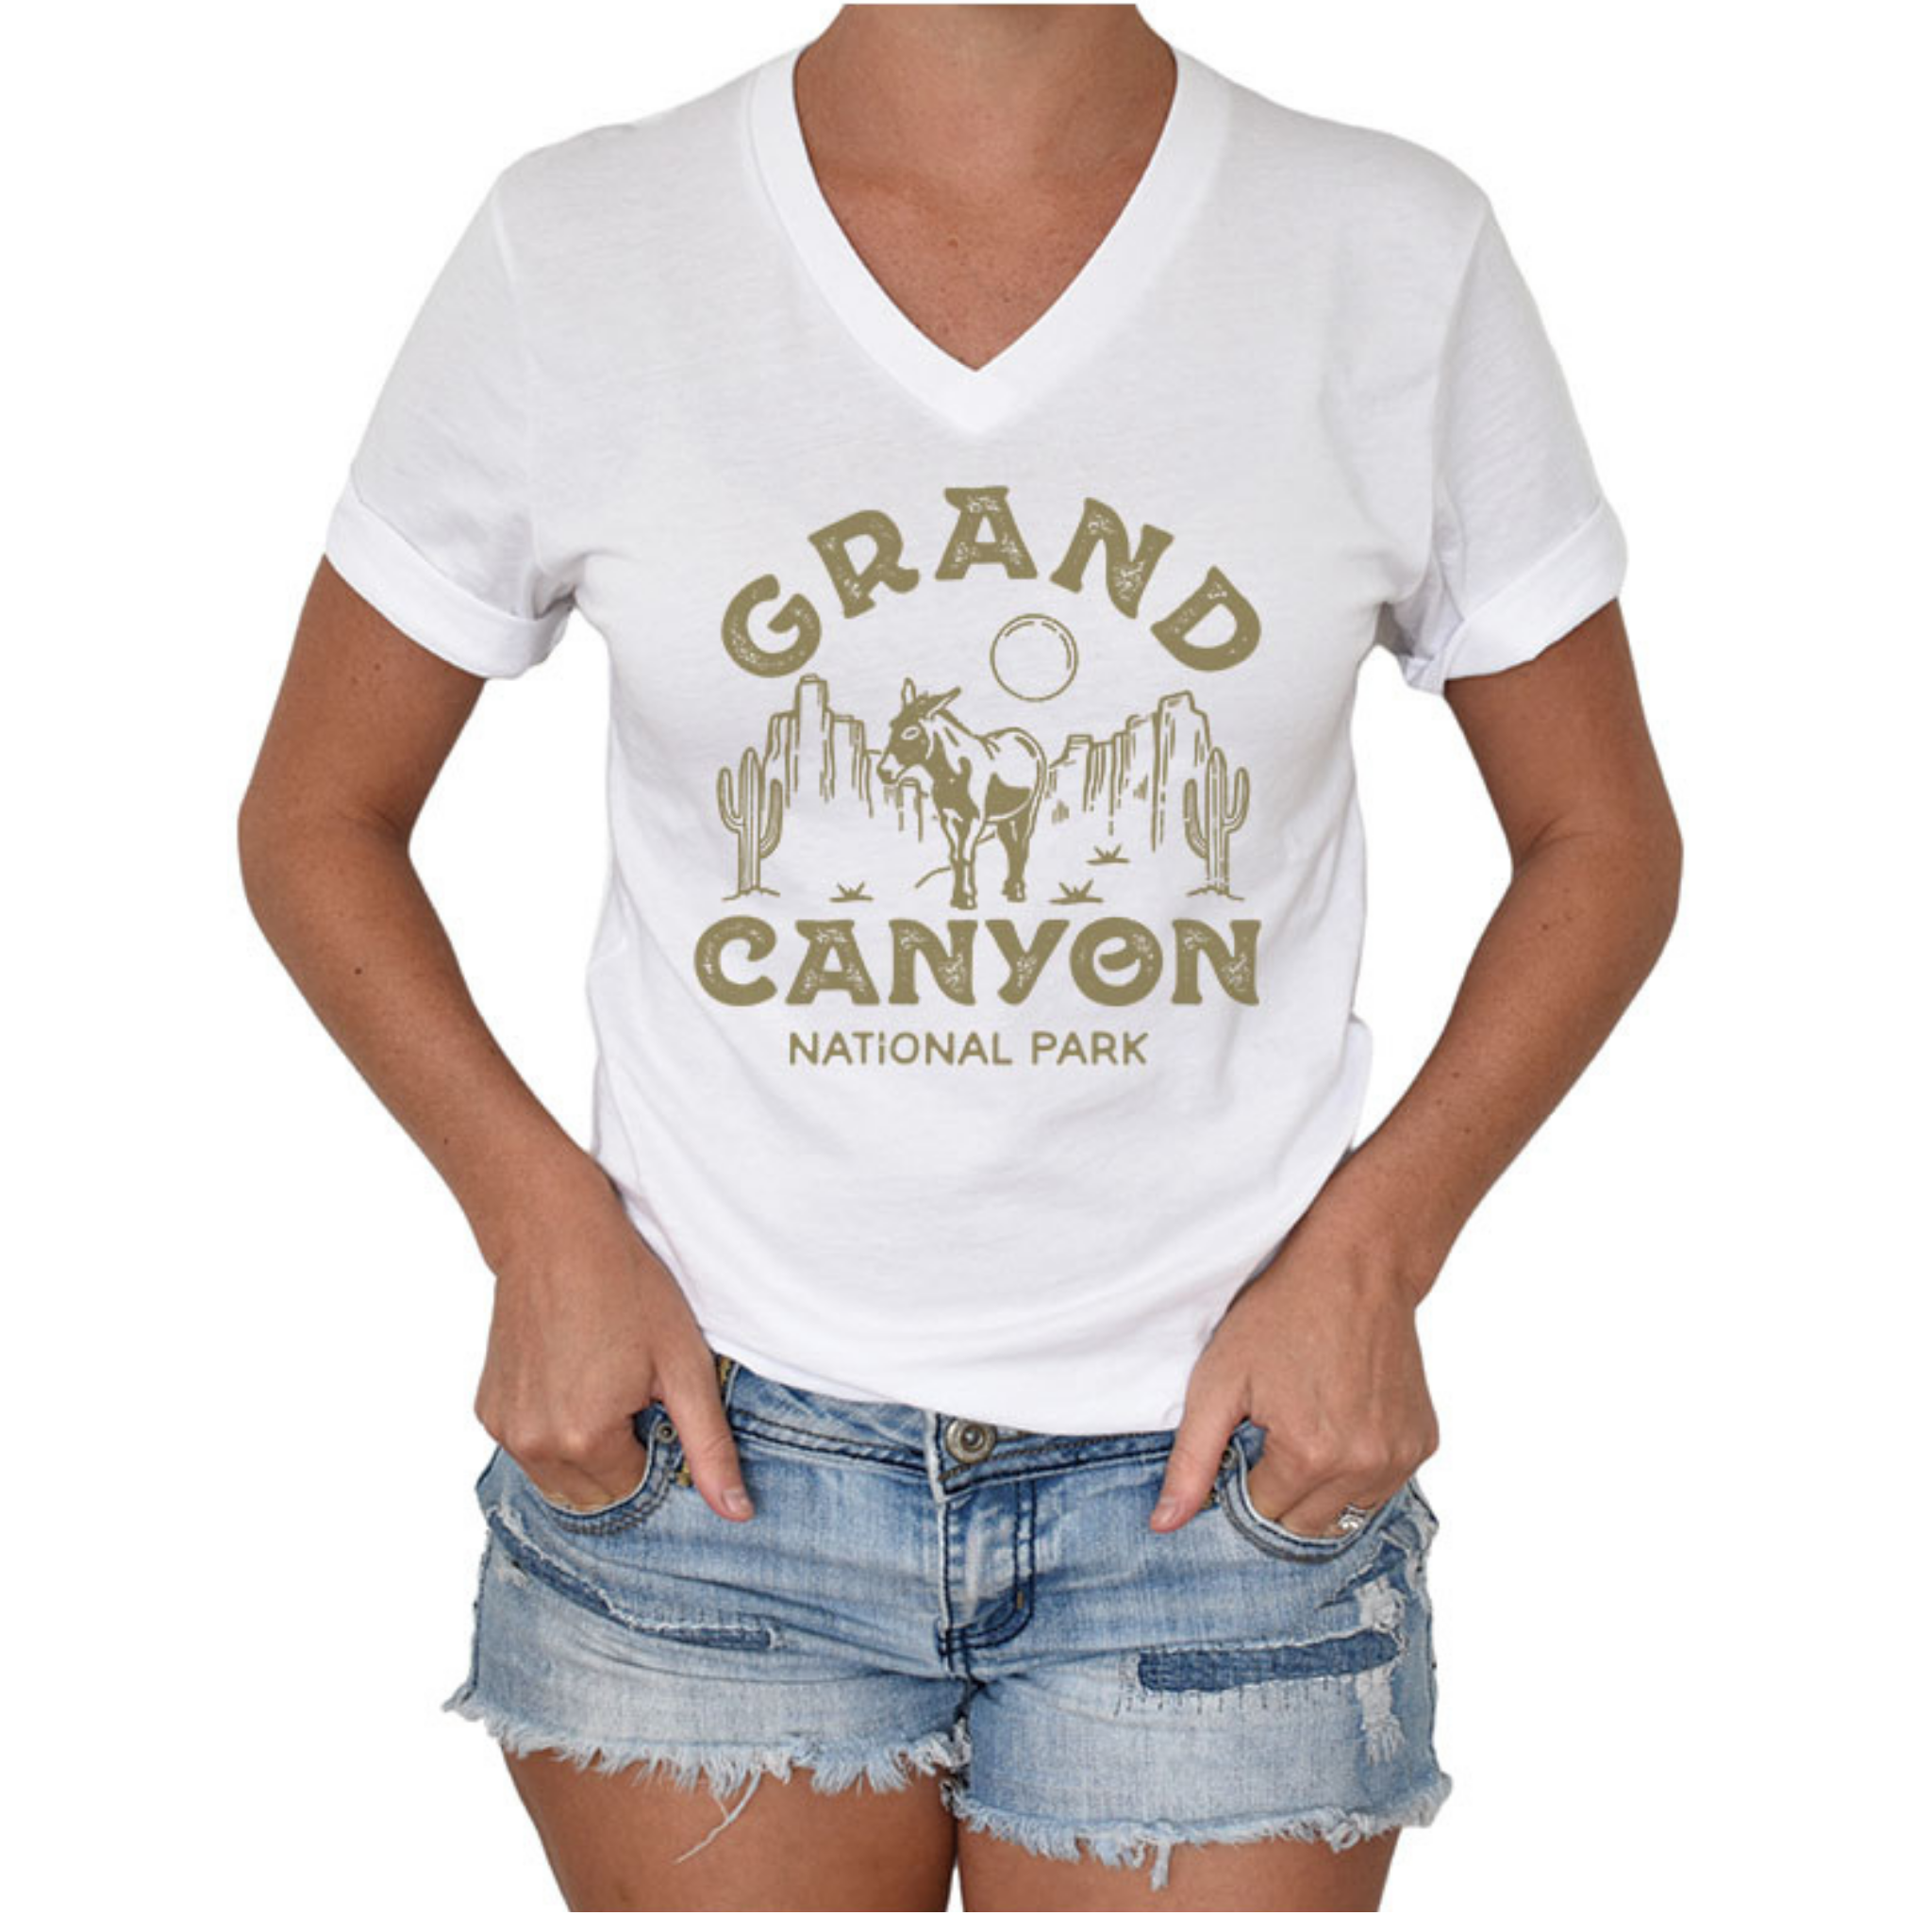 Woman wearing jean shorts and a short sleeved, v-neck t-shirt with a graphic that says "Grand Canyon National Park" around a canyon scene with cacti, a donkey, and a circle sun/moon.